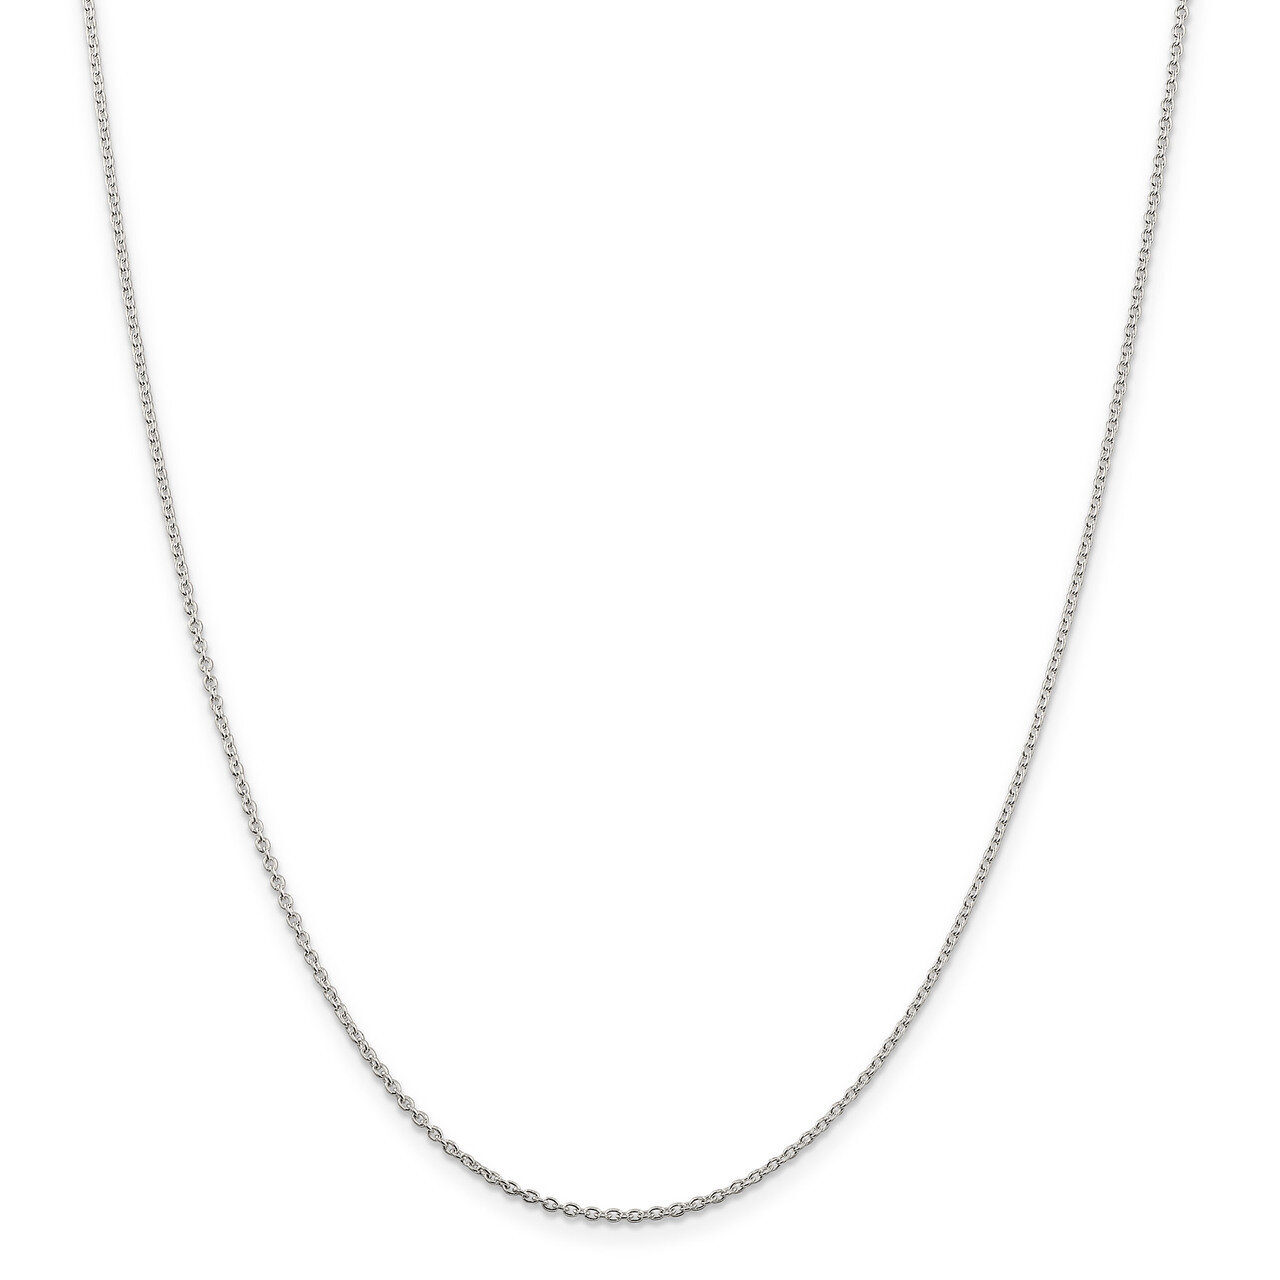 30 Inch 1.5mm Cable Chain Sterling Silver QCL040-30